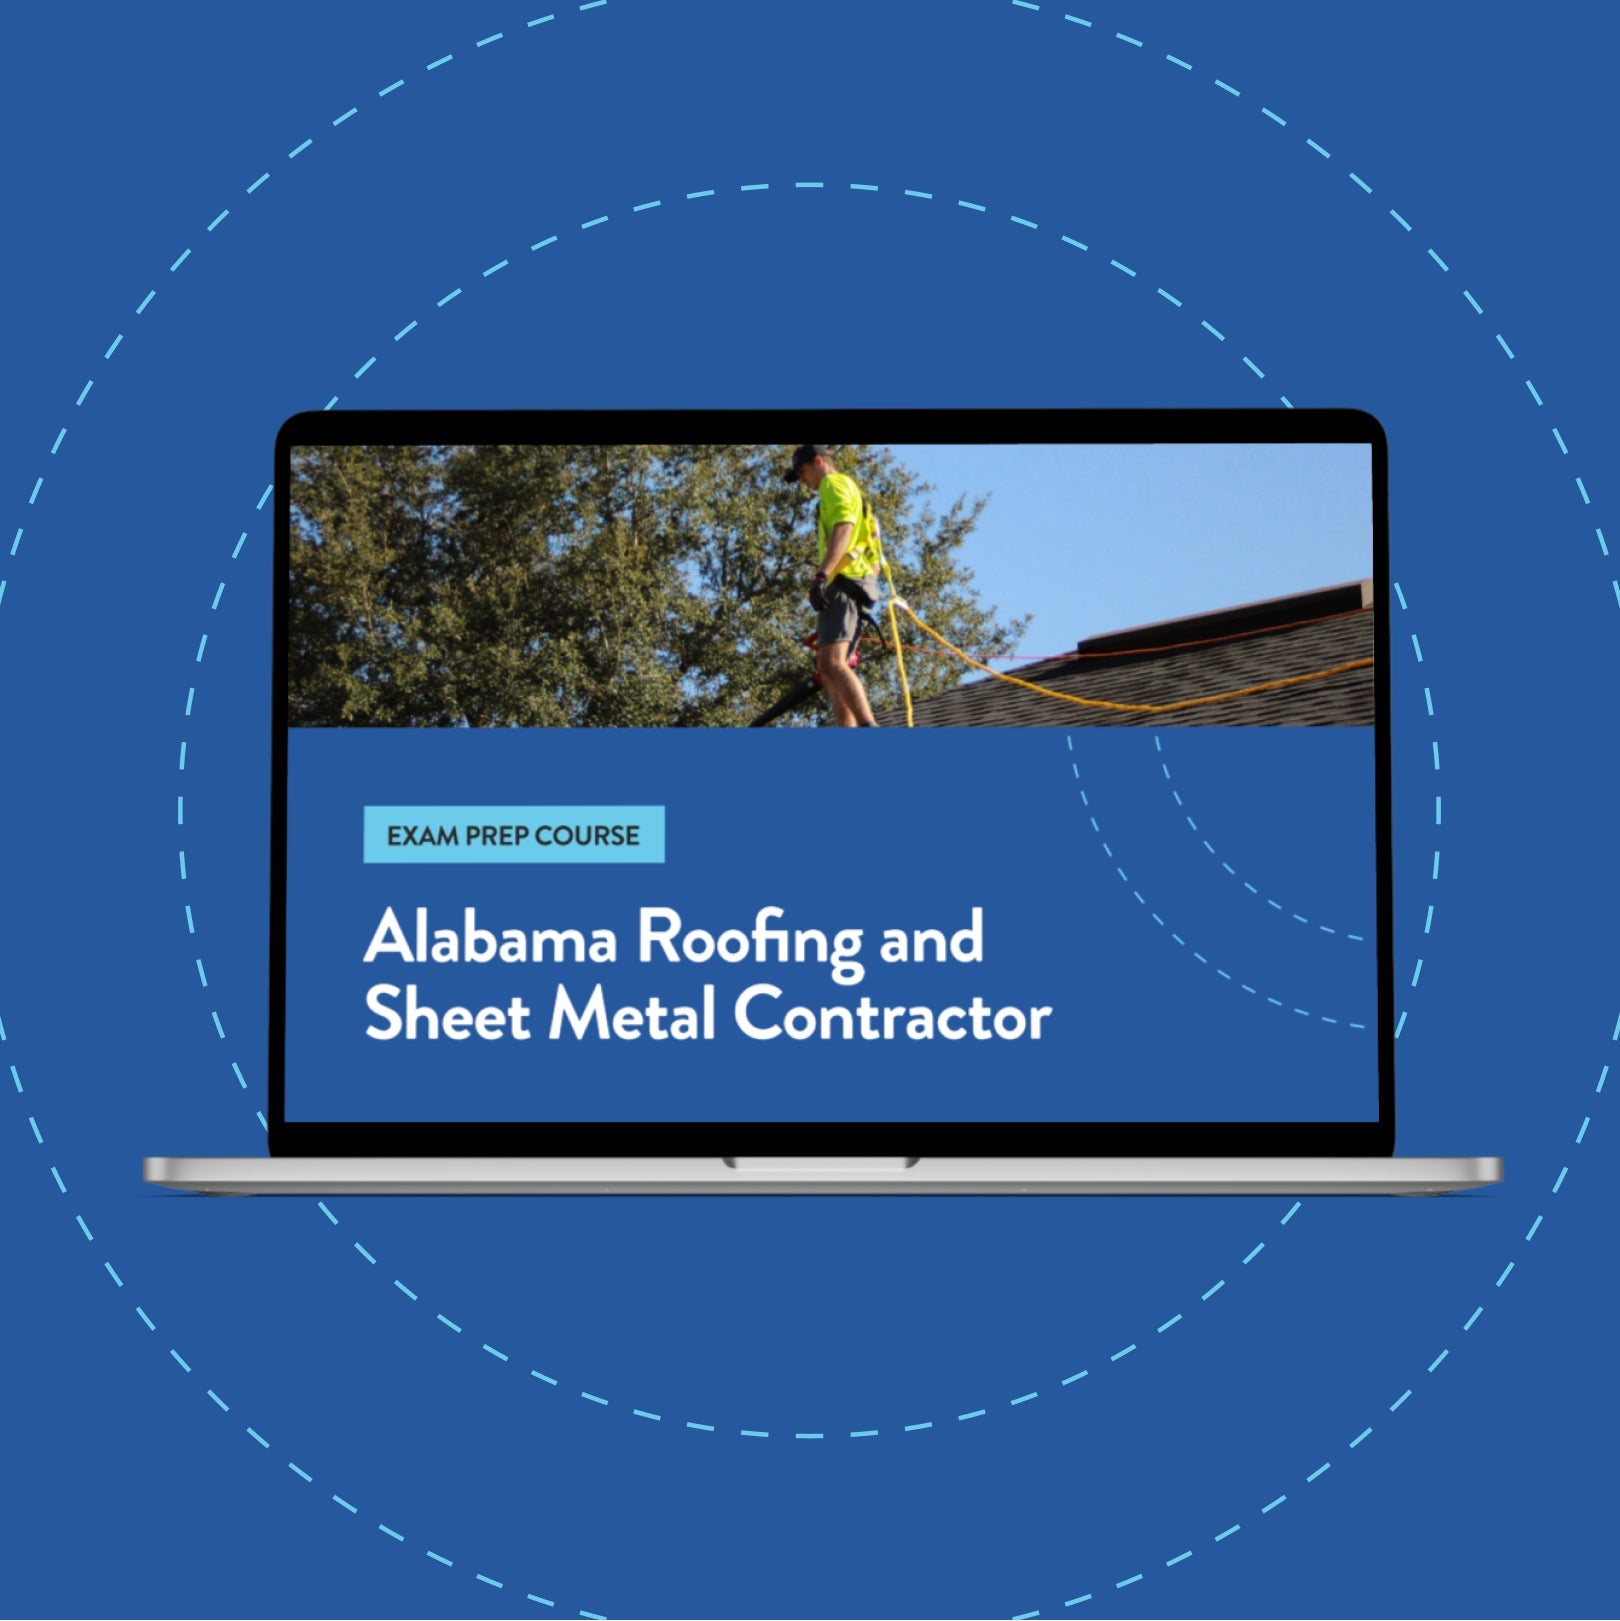 Alabama Roofing and Sheet Metal Contractor Exam Prep Course